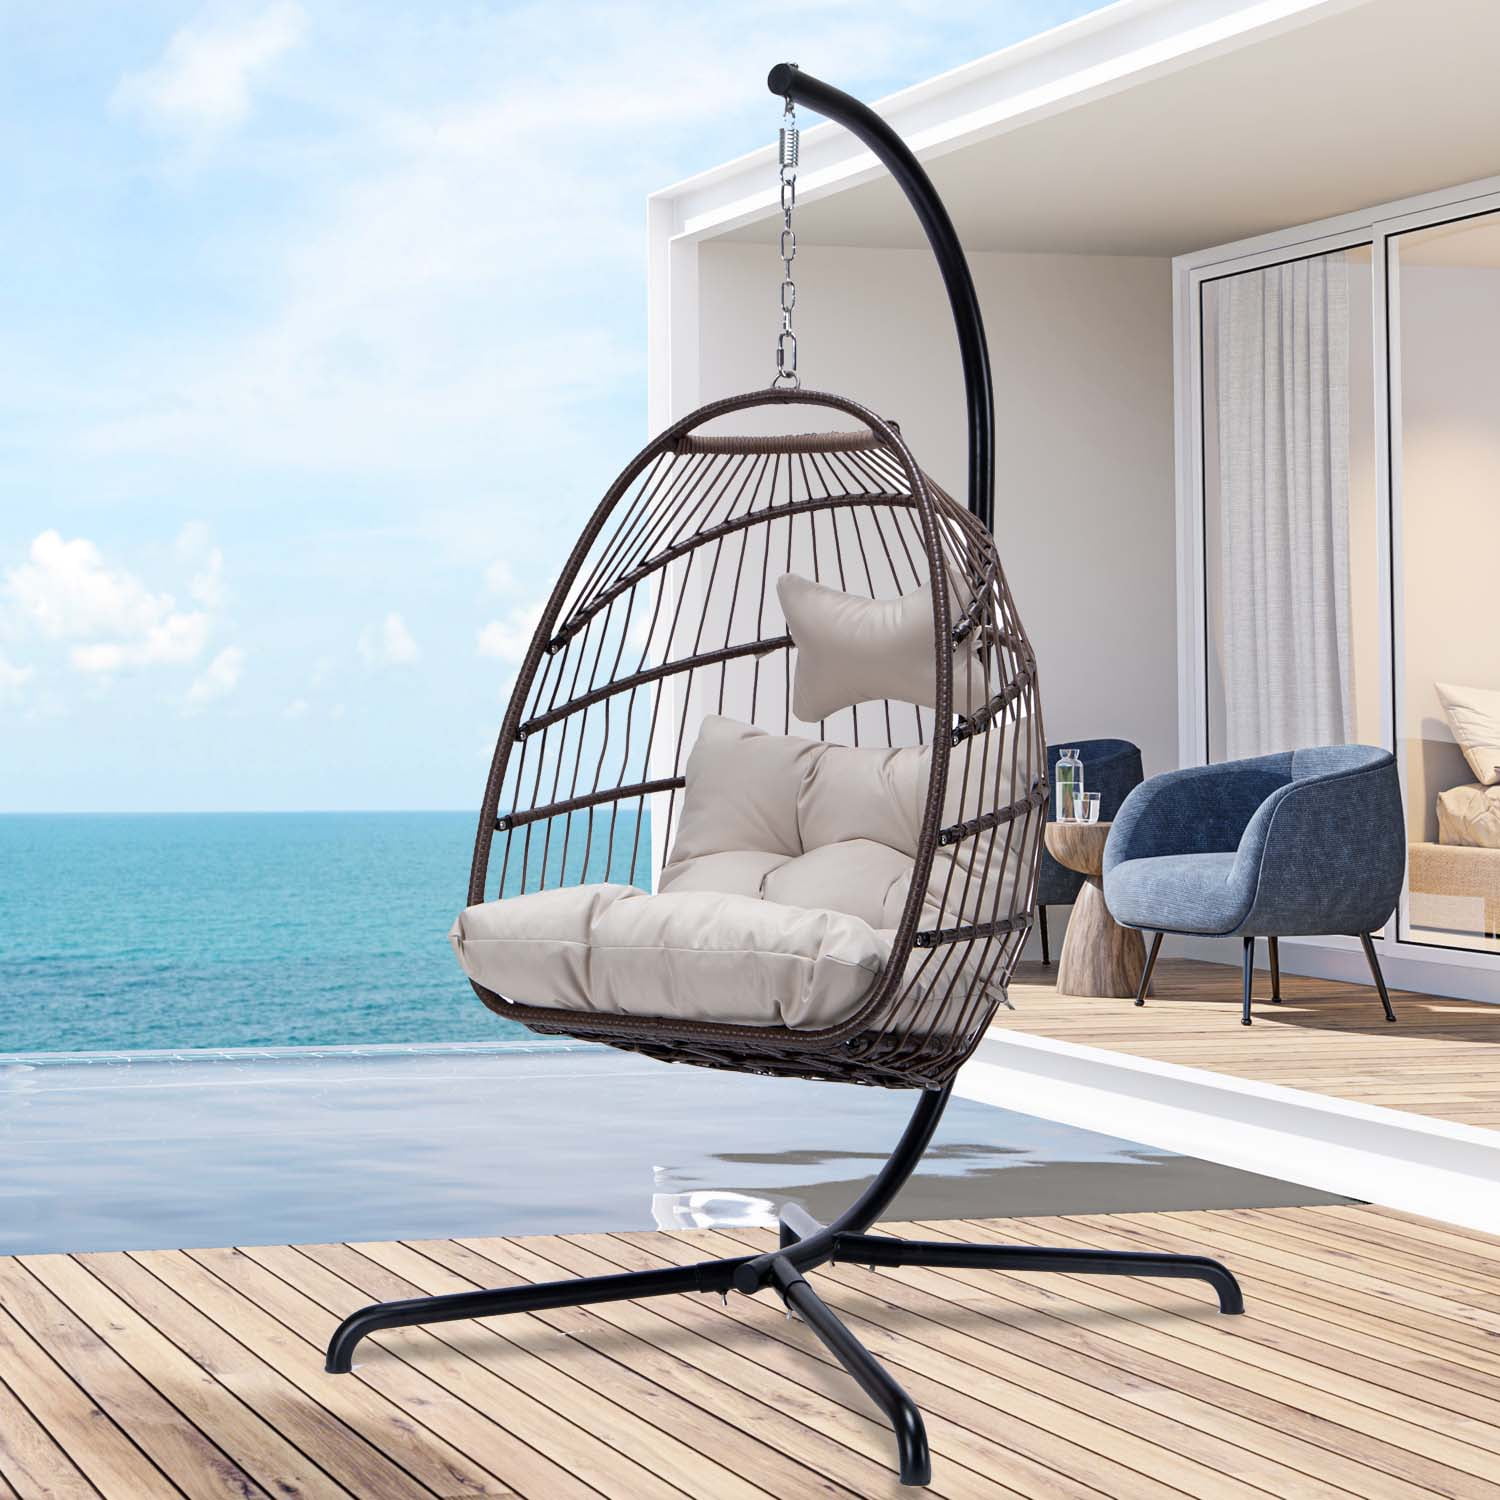 Wine NICESOUL Patio Hanging Egg Swing Chair with Steel Stand Set Nest Woved Basket Design with Cushions PE Wicker Chairs for Bedroom Living Room Indoor Outdoor 